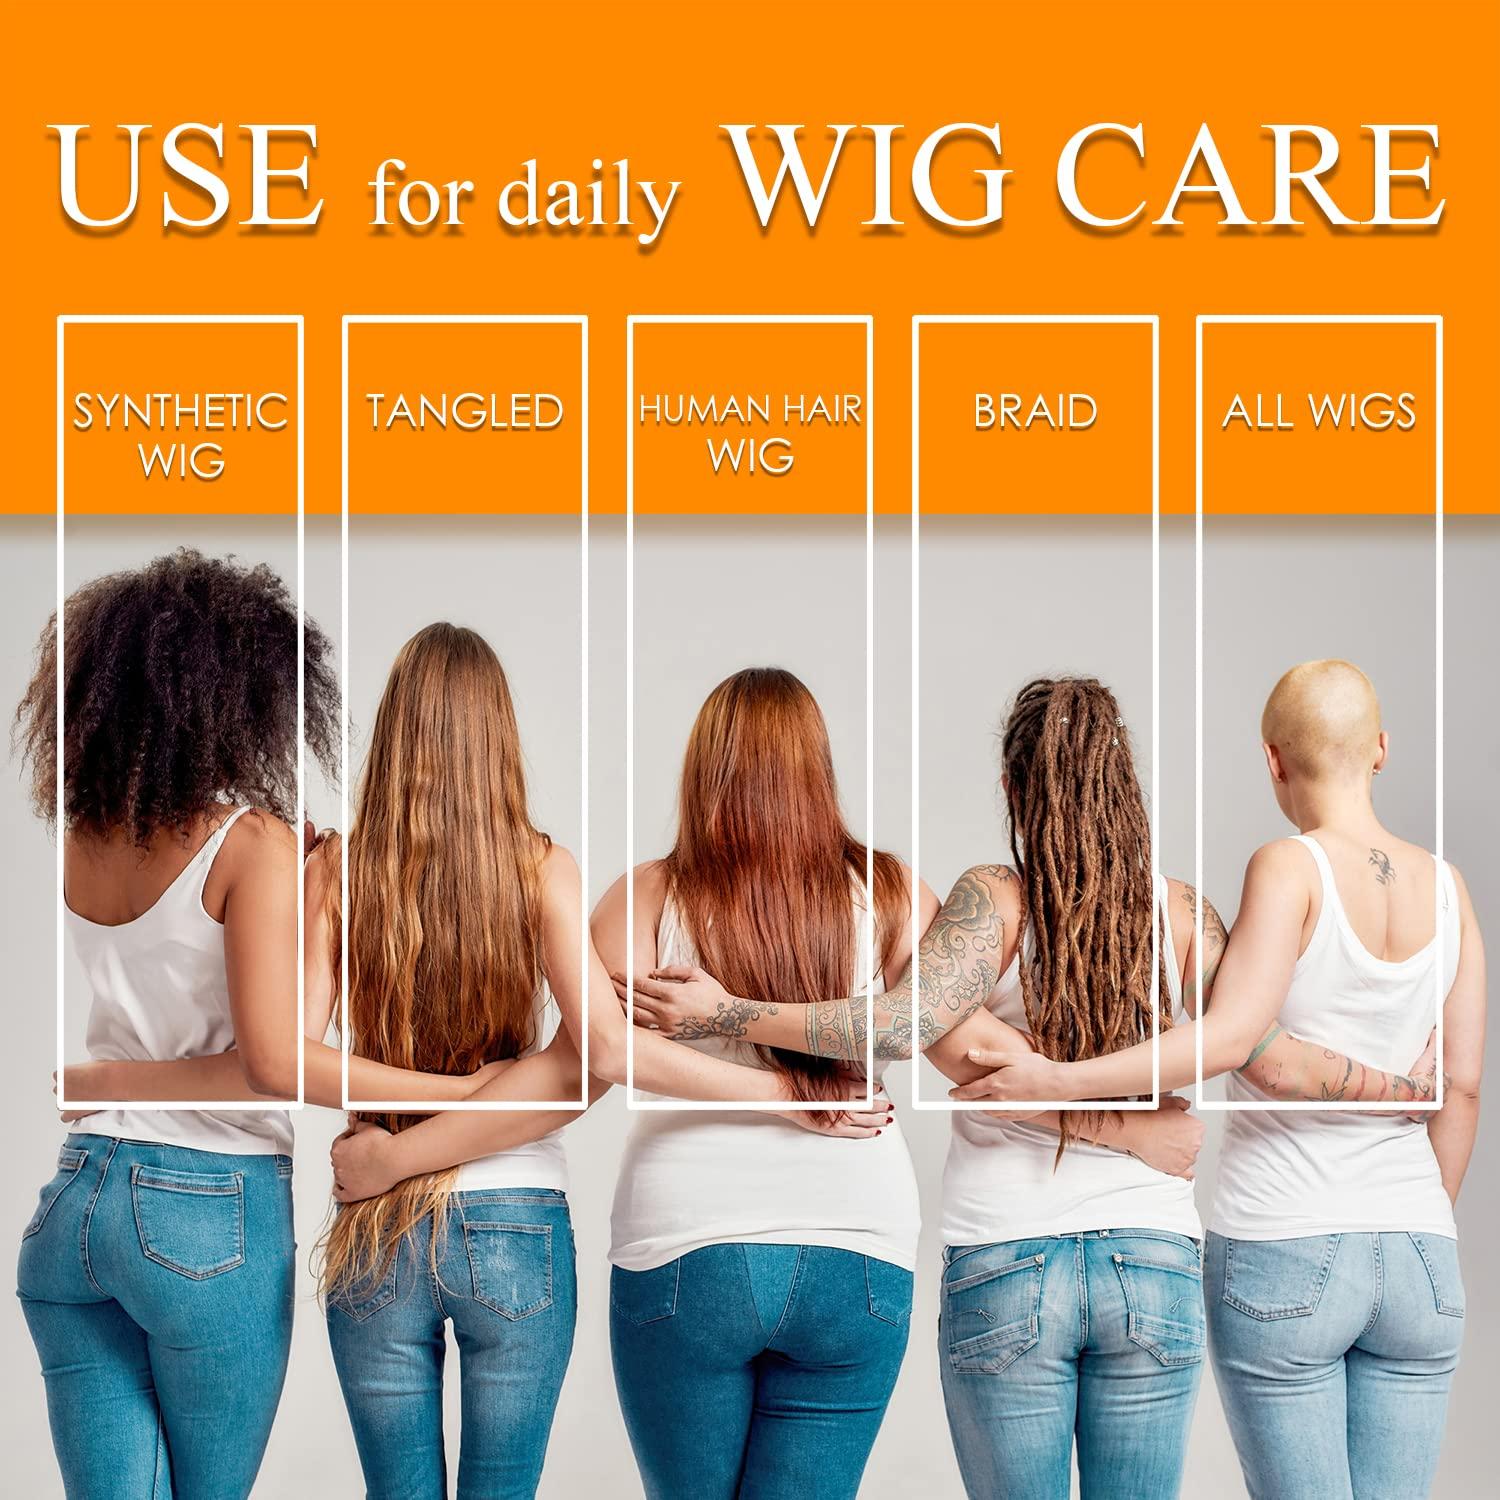 WIG CARE KIT, Wigs for Women